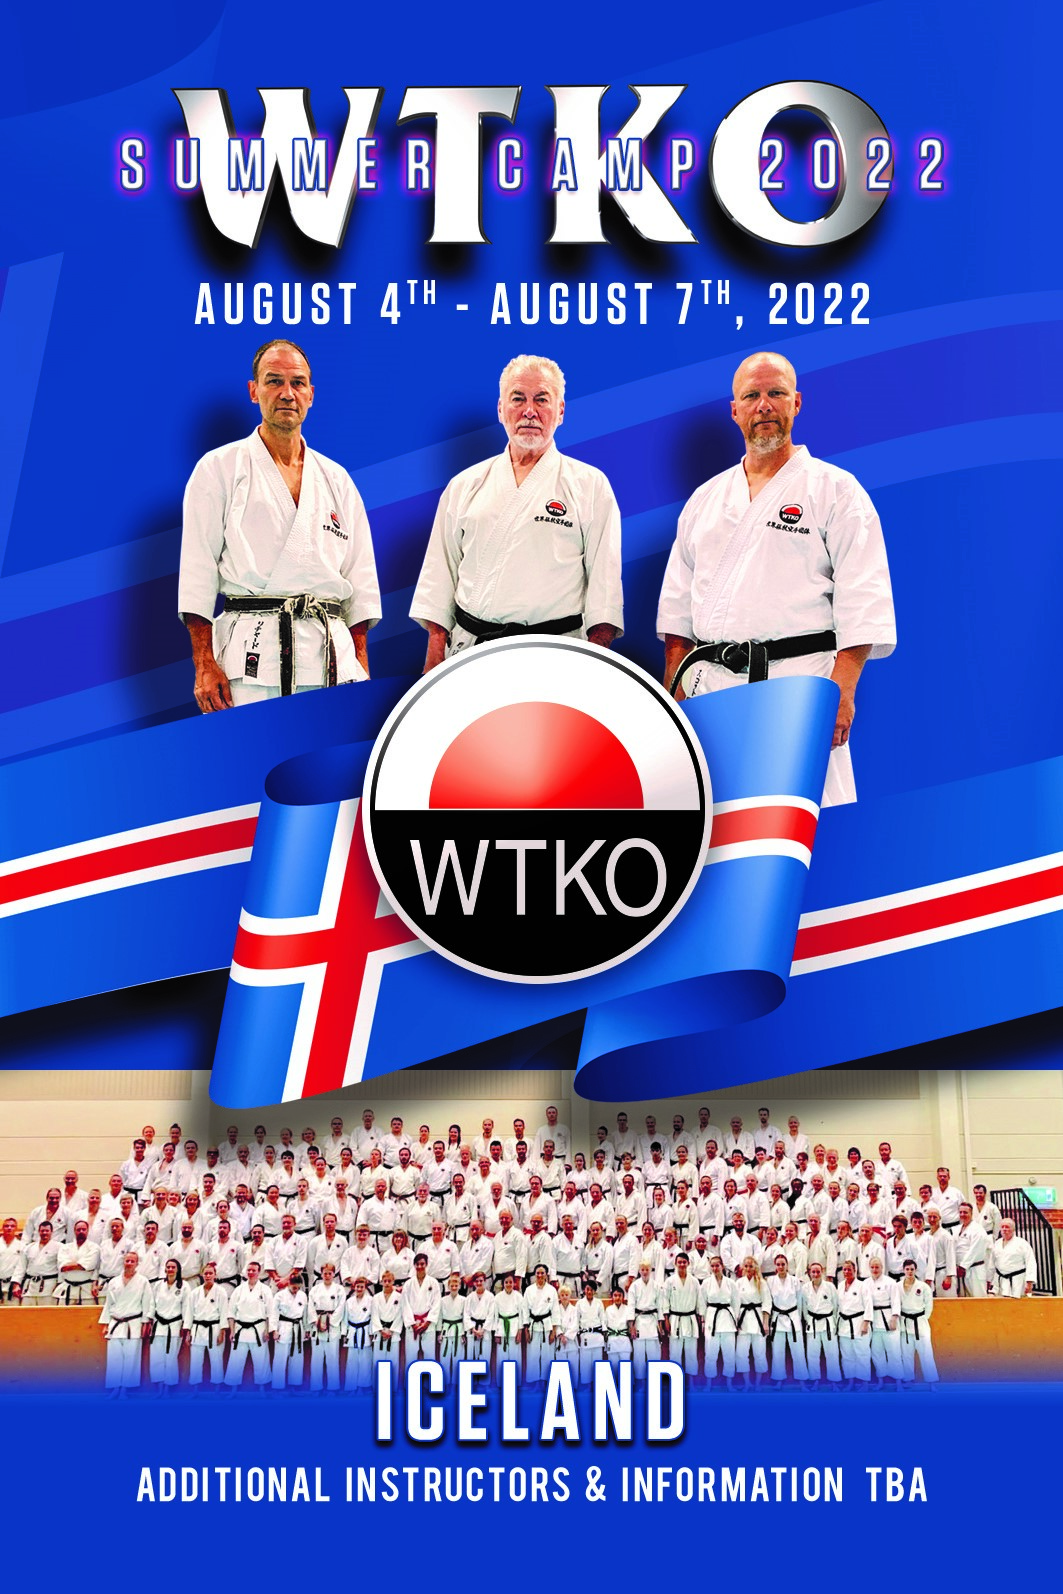 WTKO Summer Camp 2022 - August 4-7, 2022, Iceland, additional instructors and information to be announced